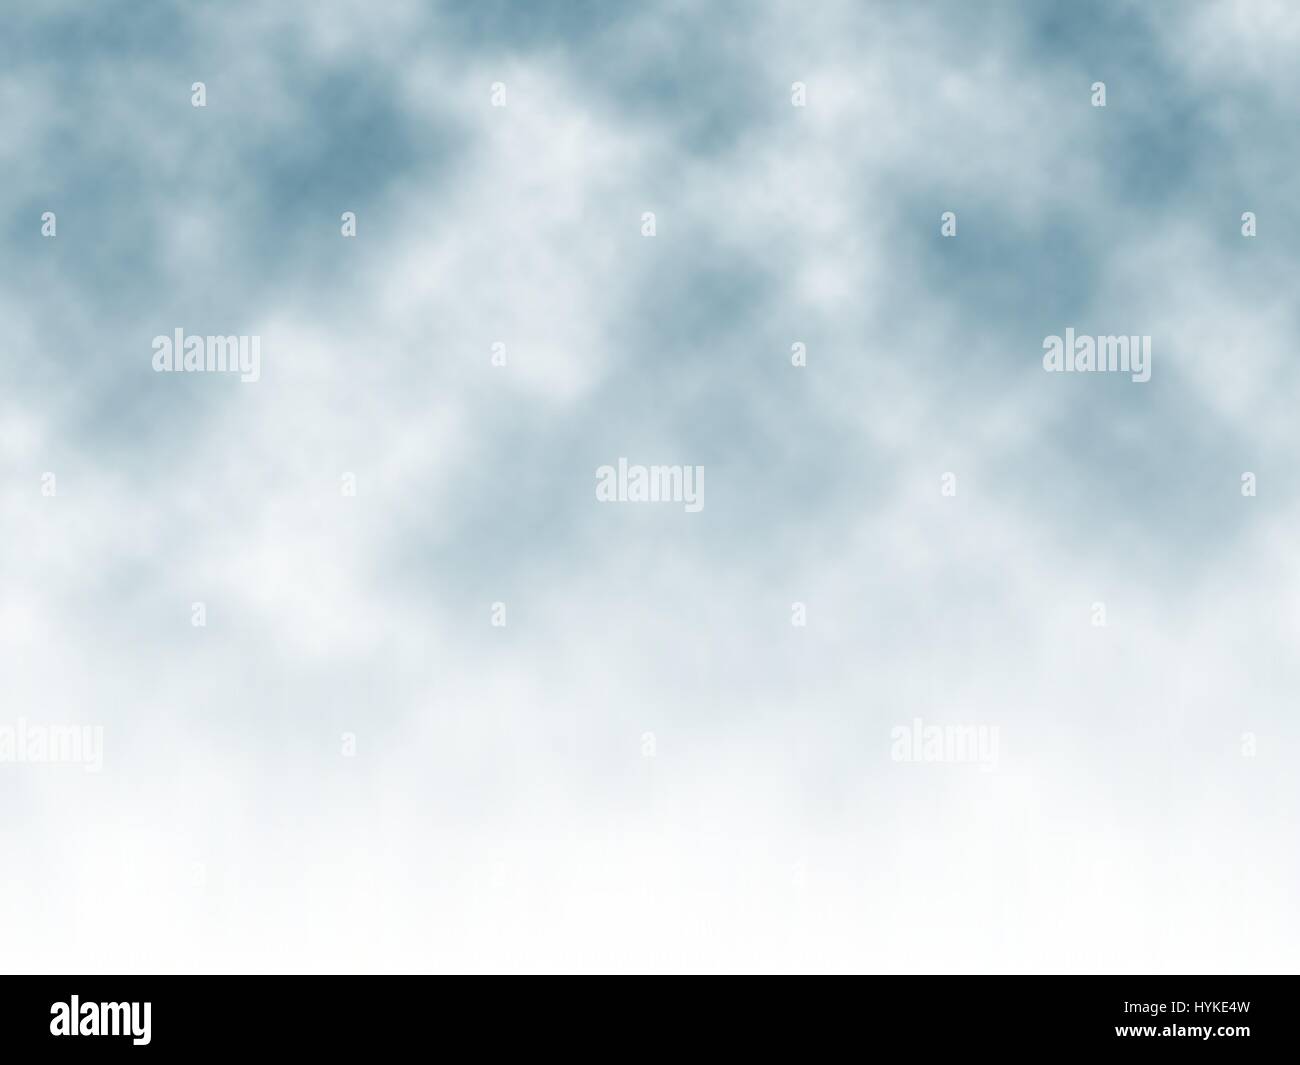 Editable vector misty background made using a gradient mesh Stock Vector